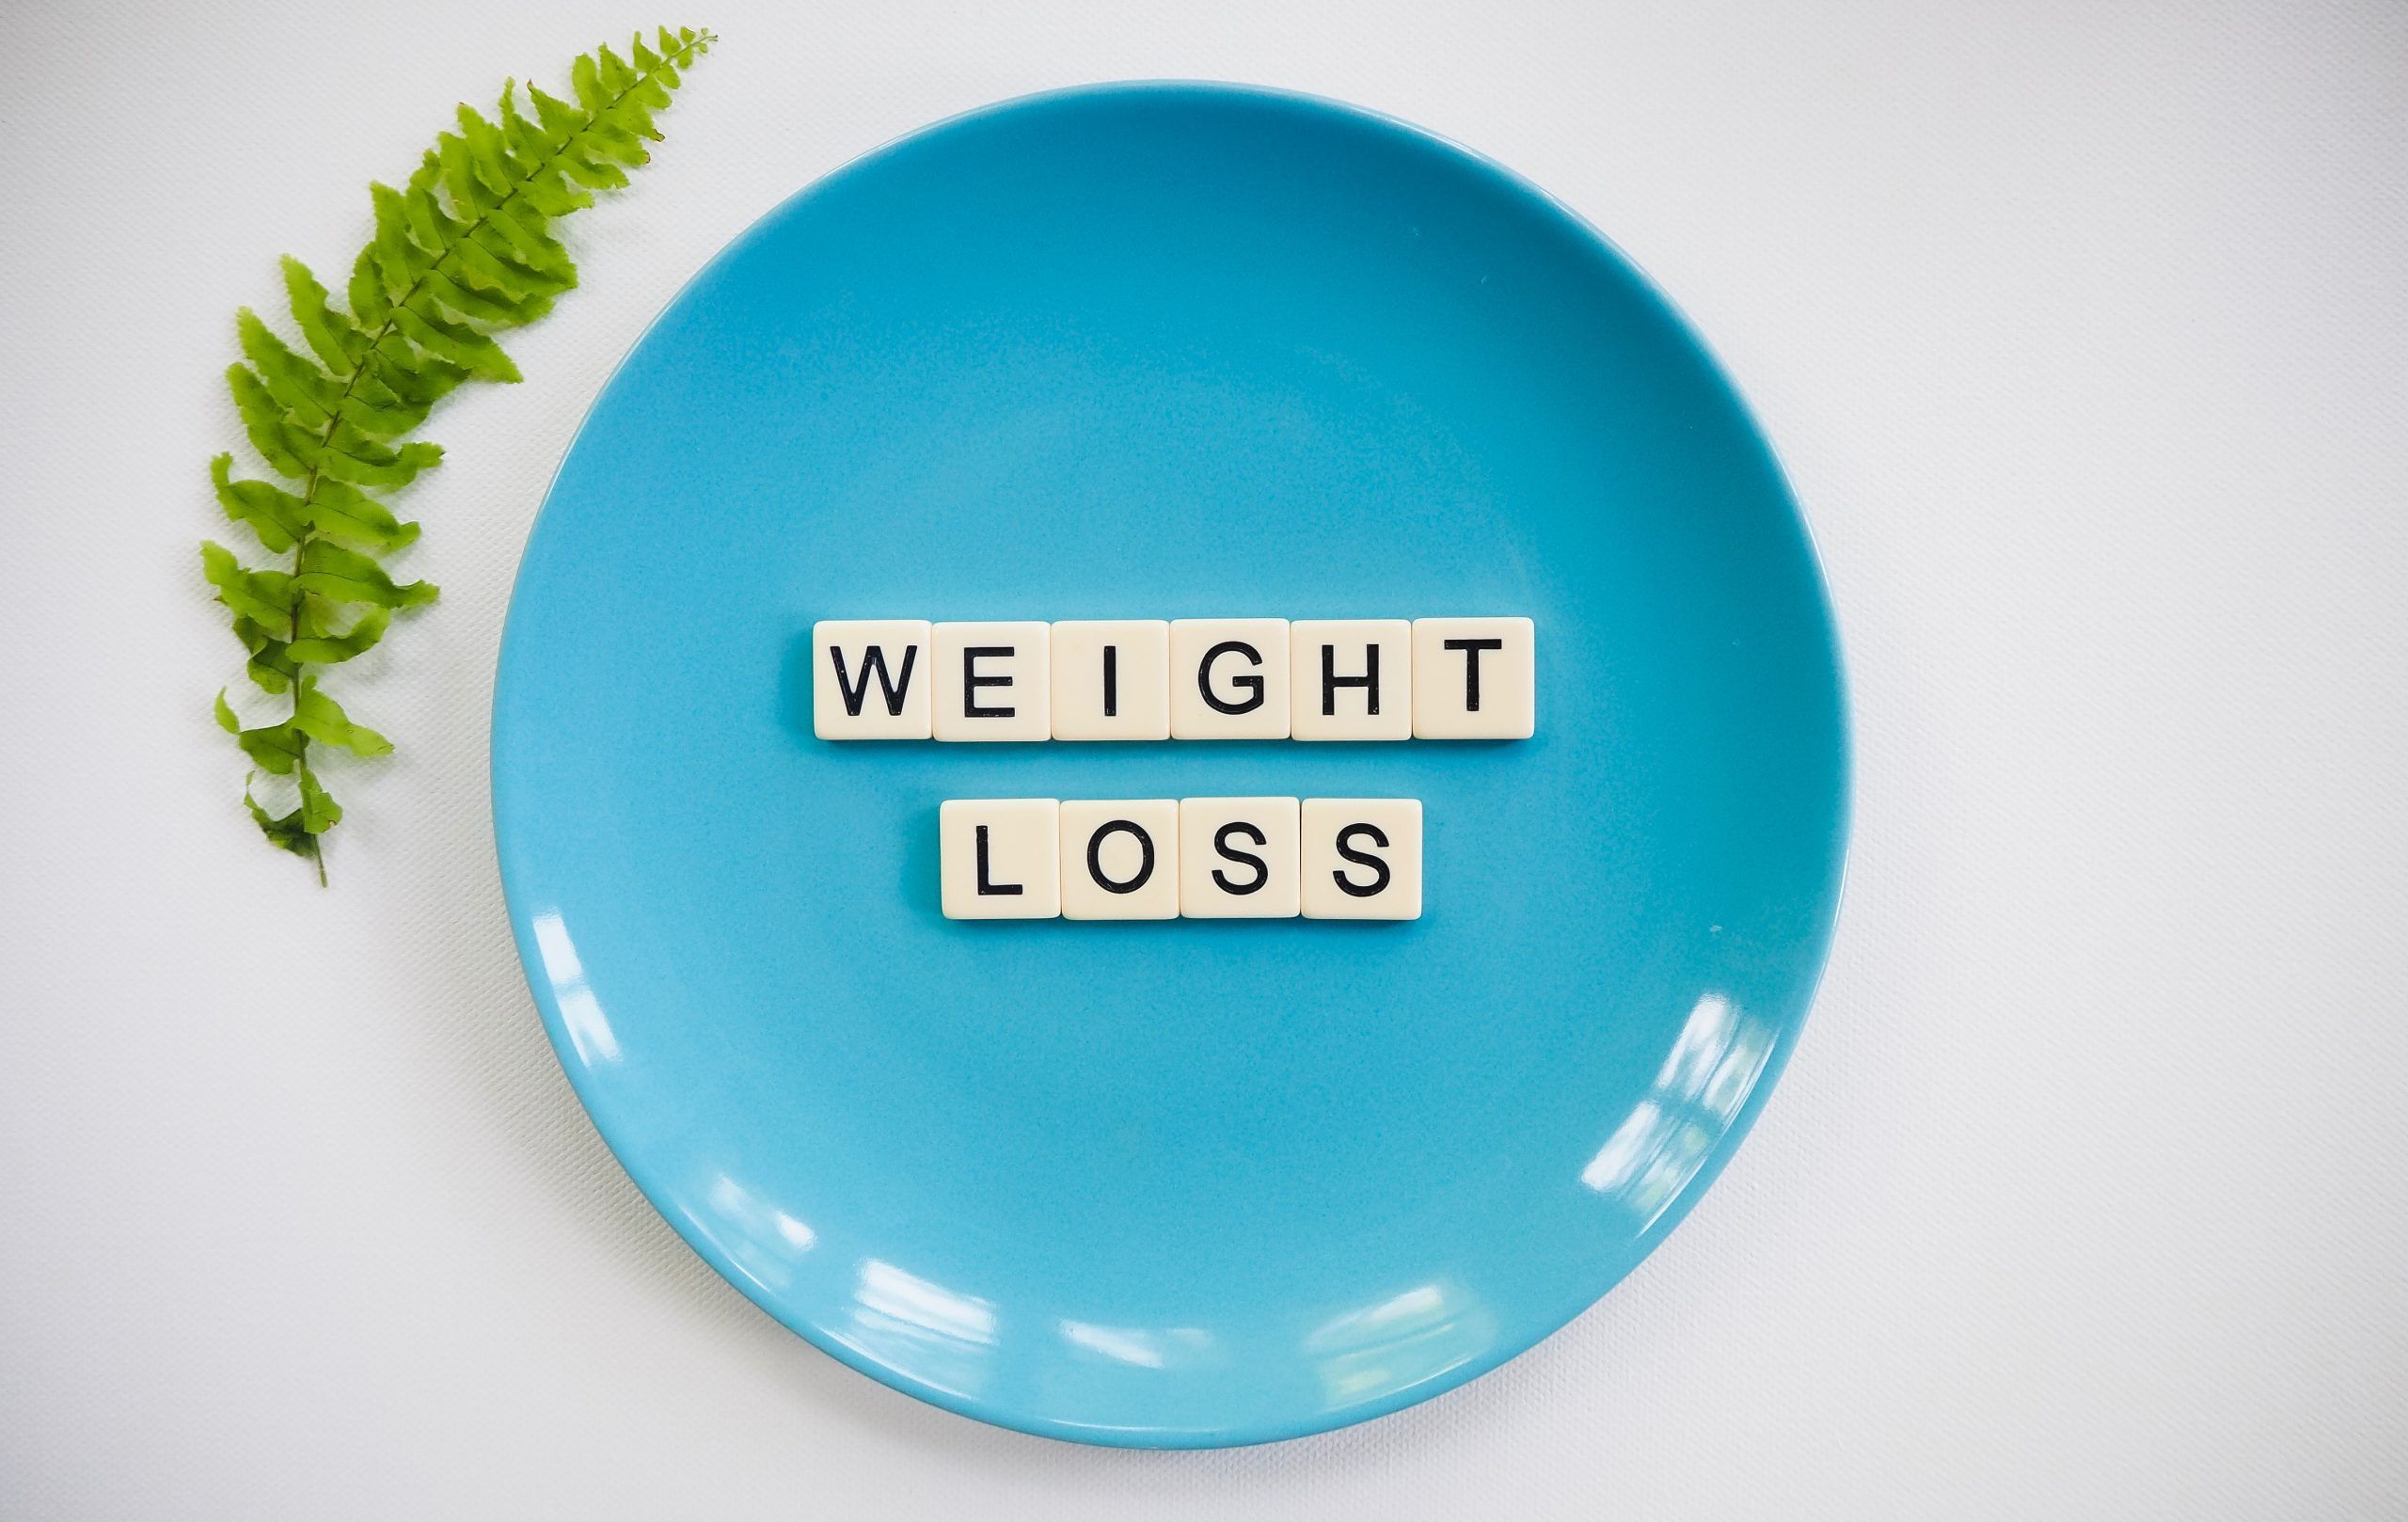 A Blue Plate With Weight Loss Written On It